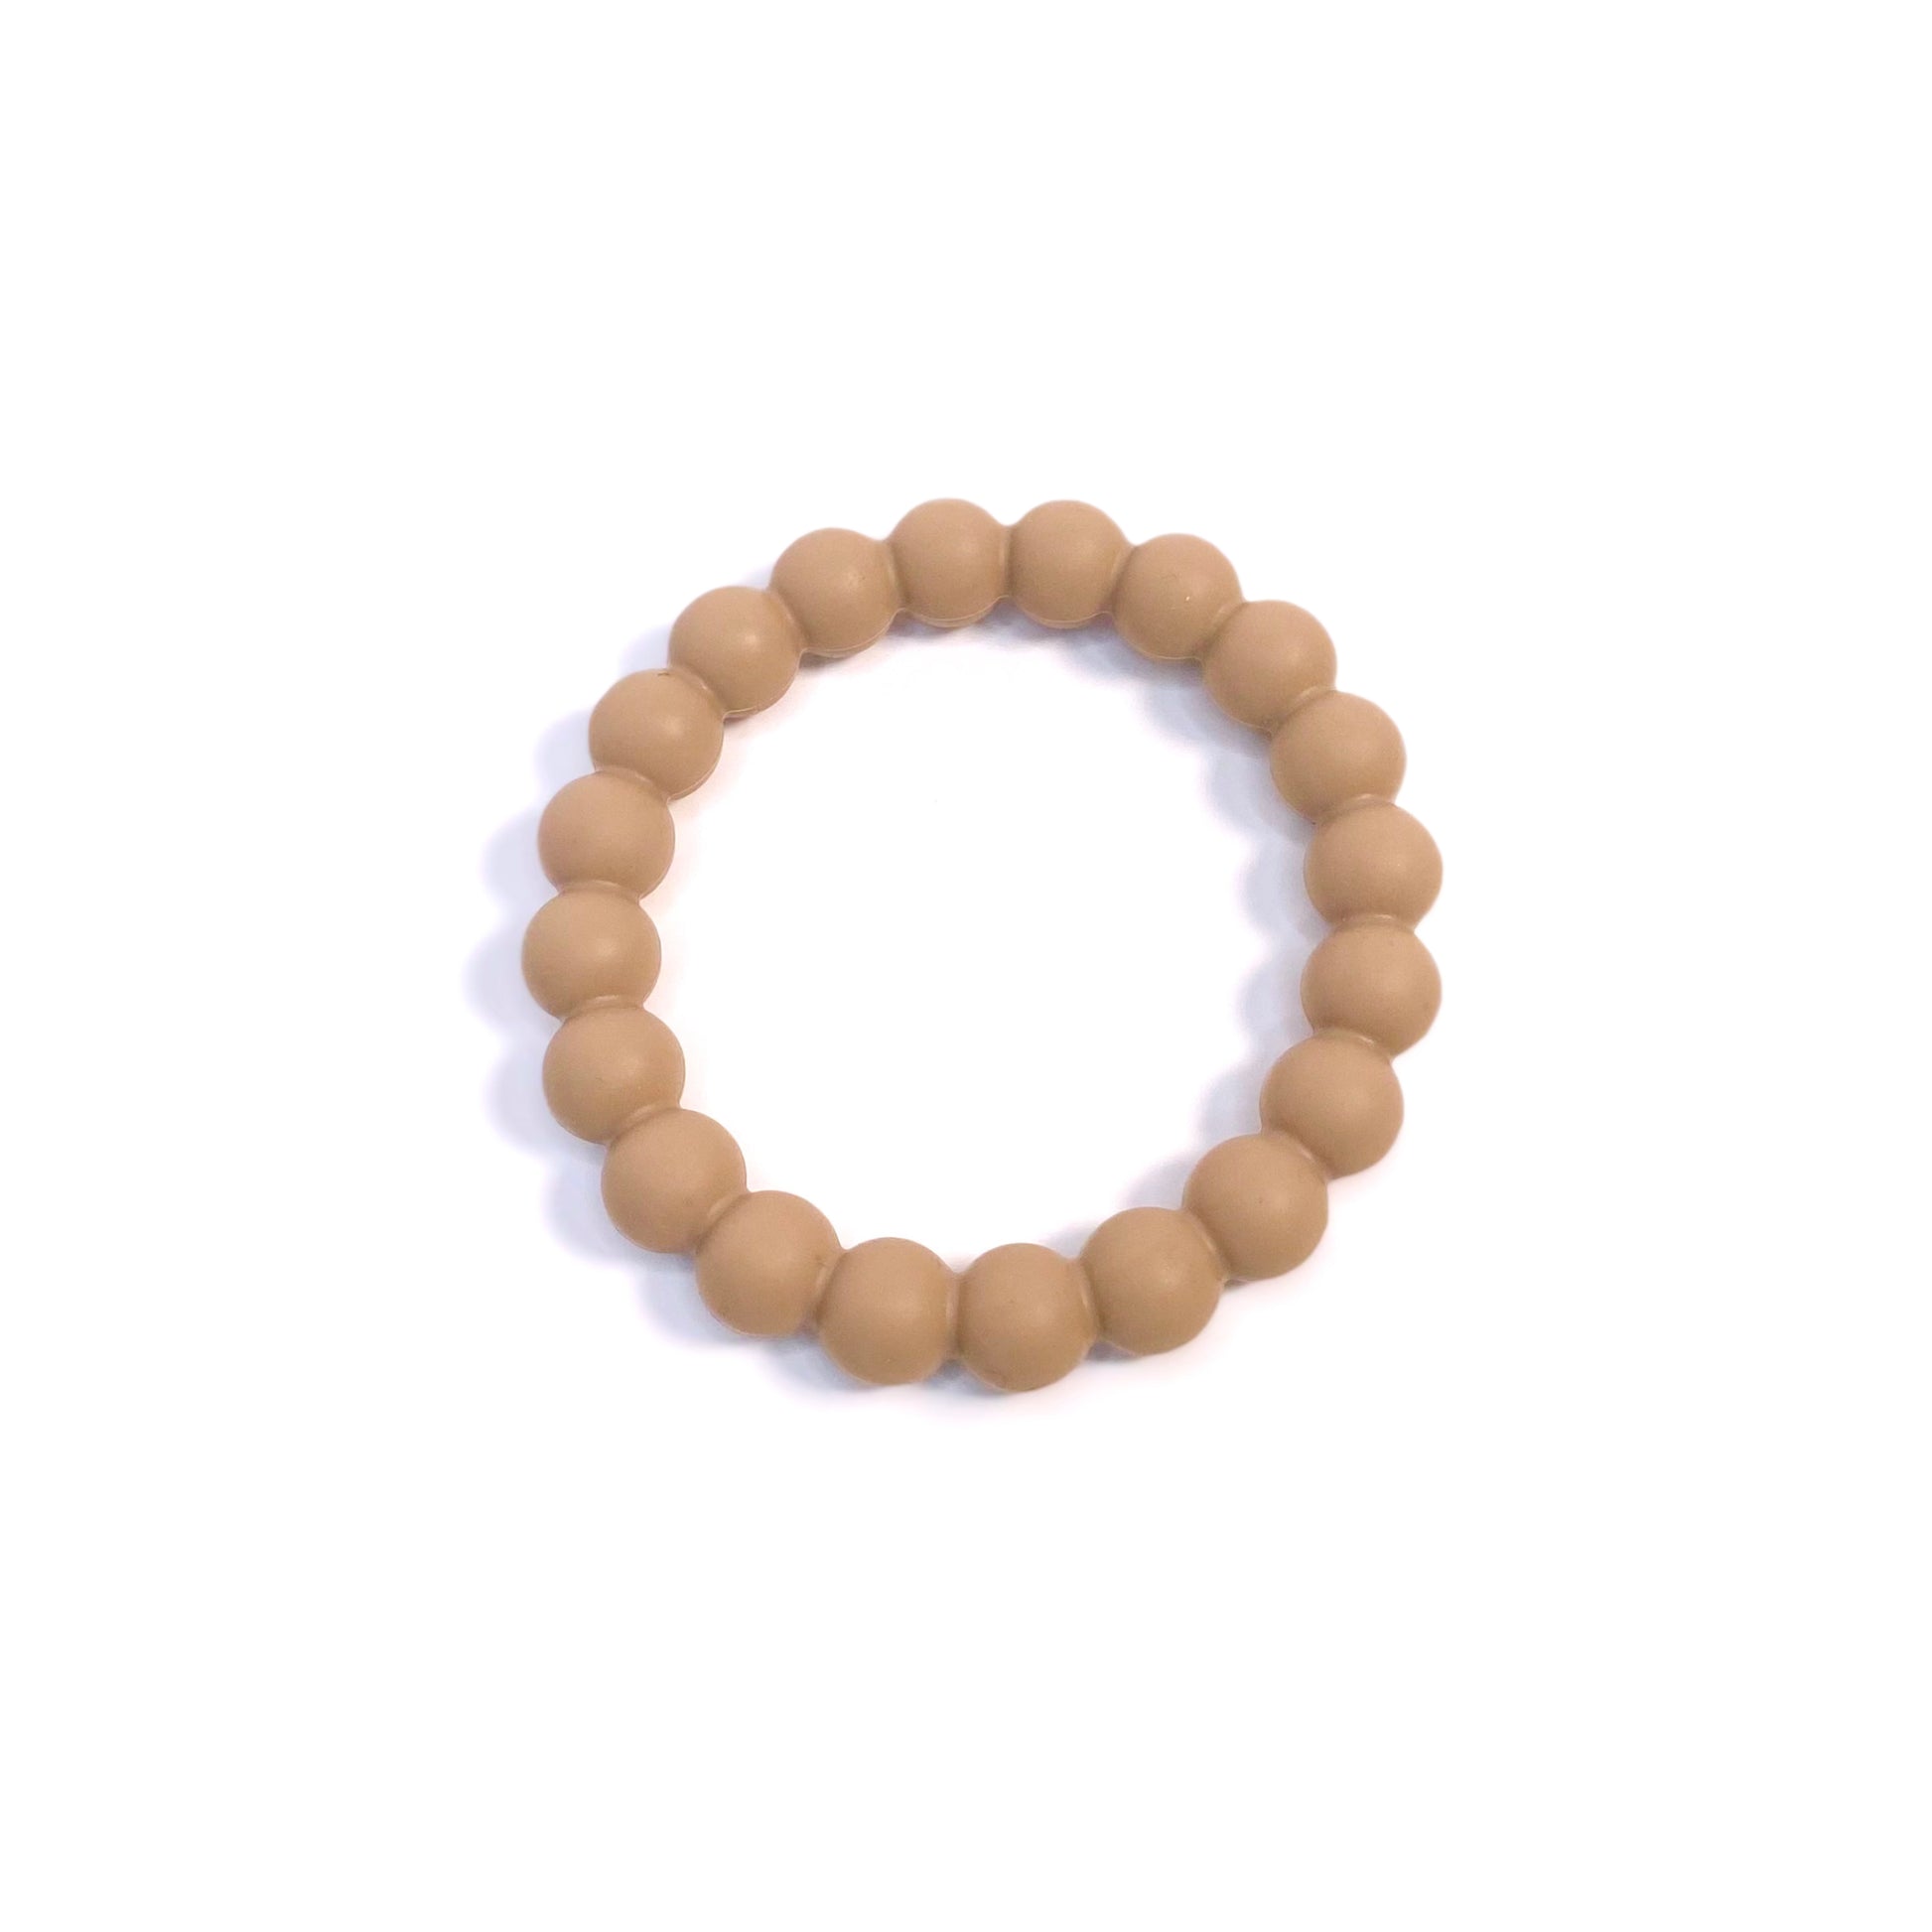 A beige/brown beaded silicone teething ring. Can be worn as a bracelet.